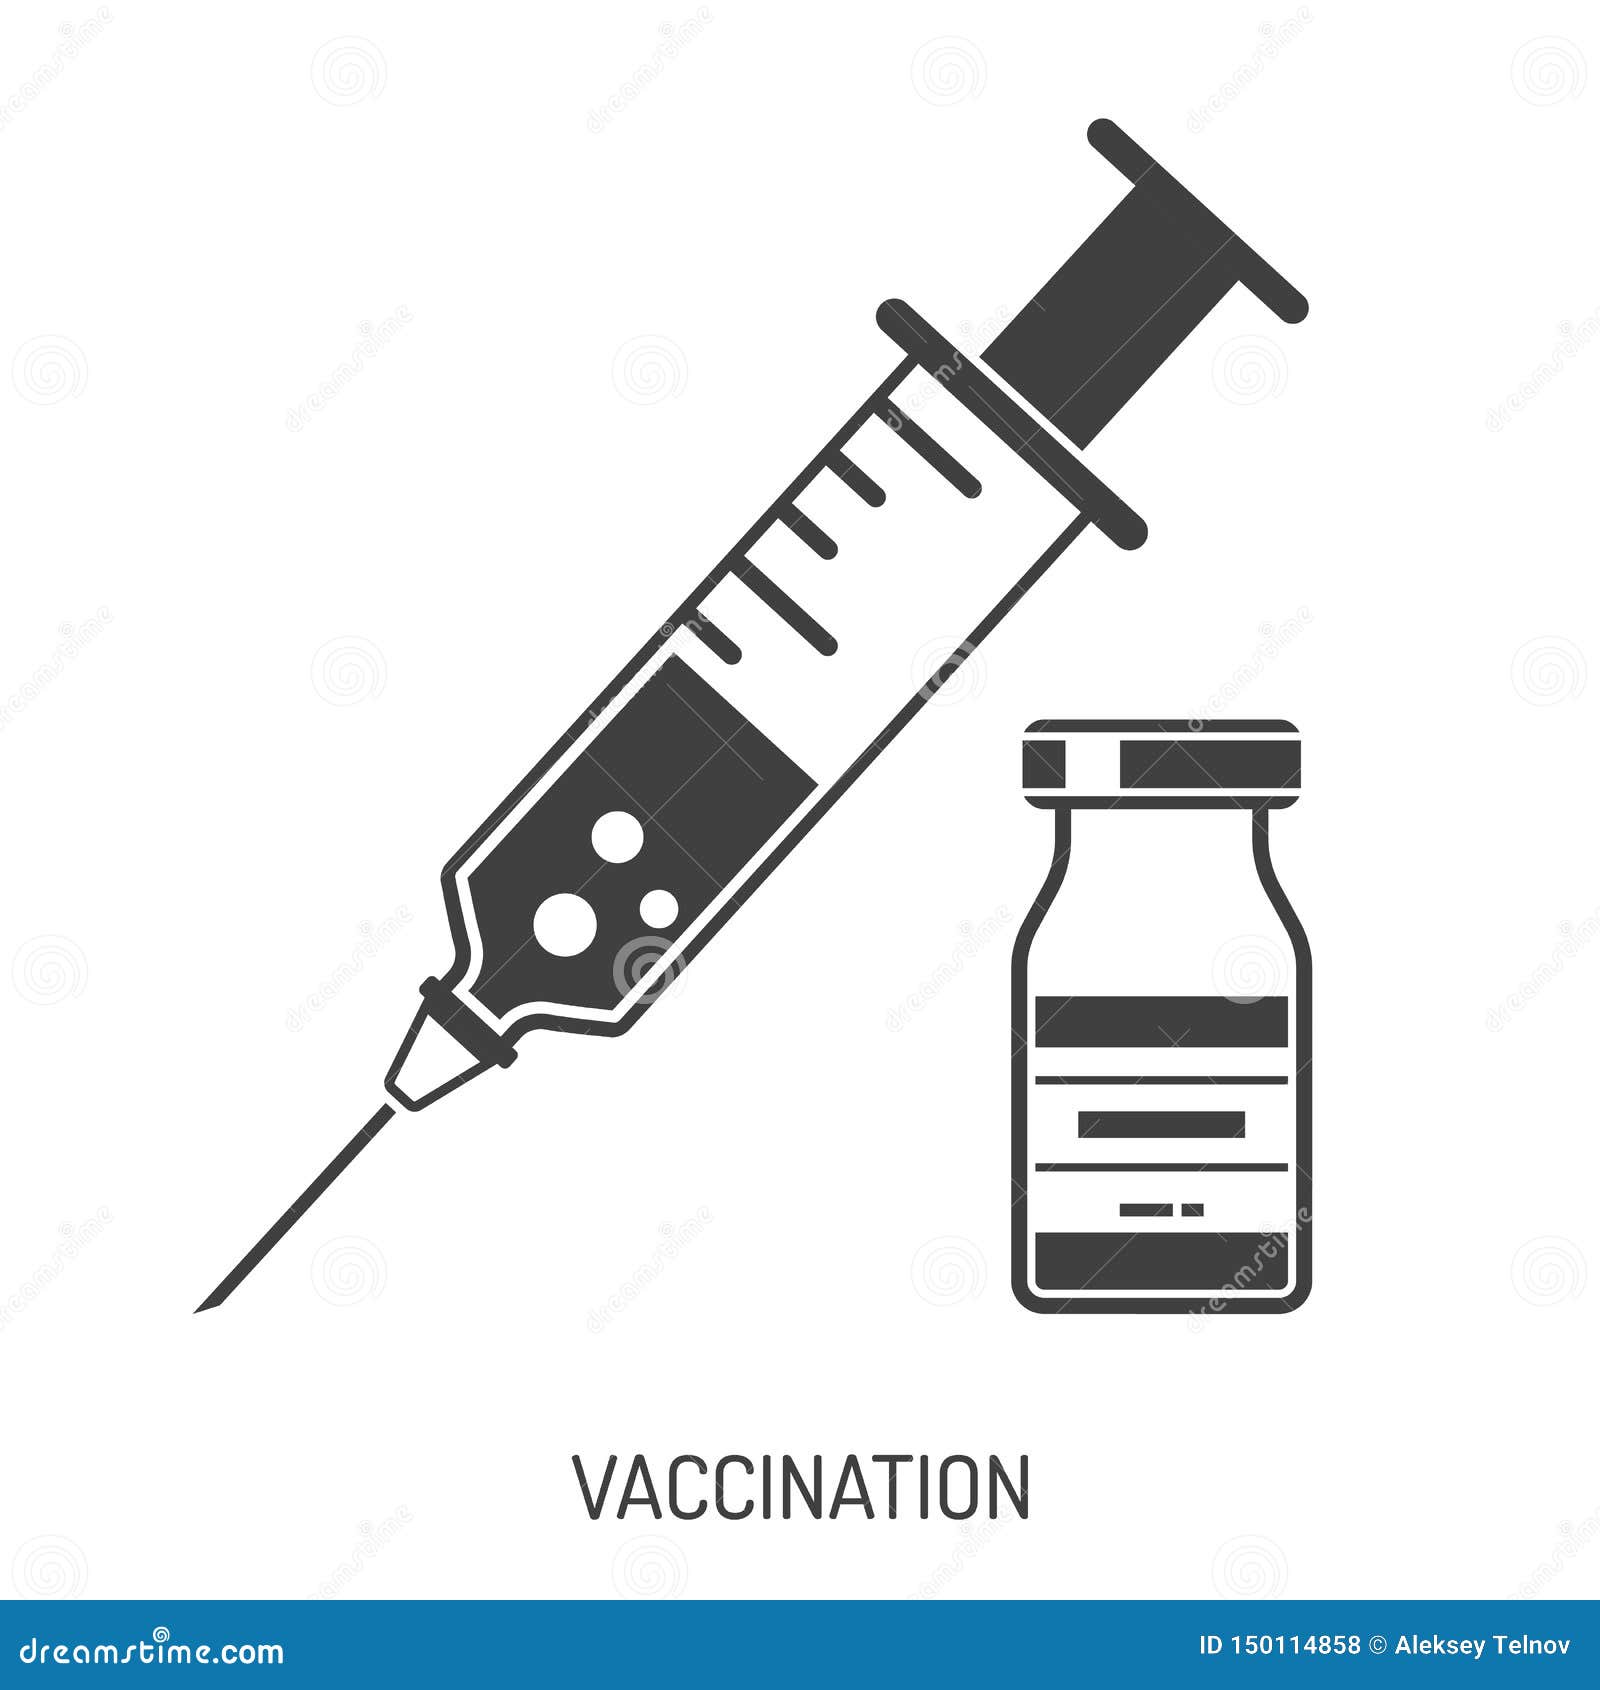 vaccination concept with syringe and vial icon